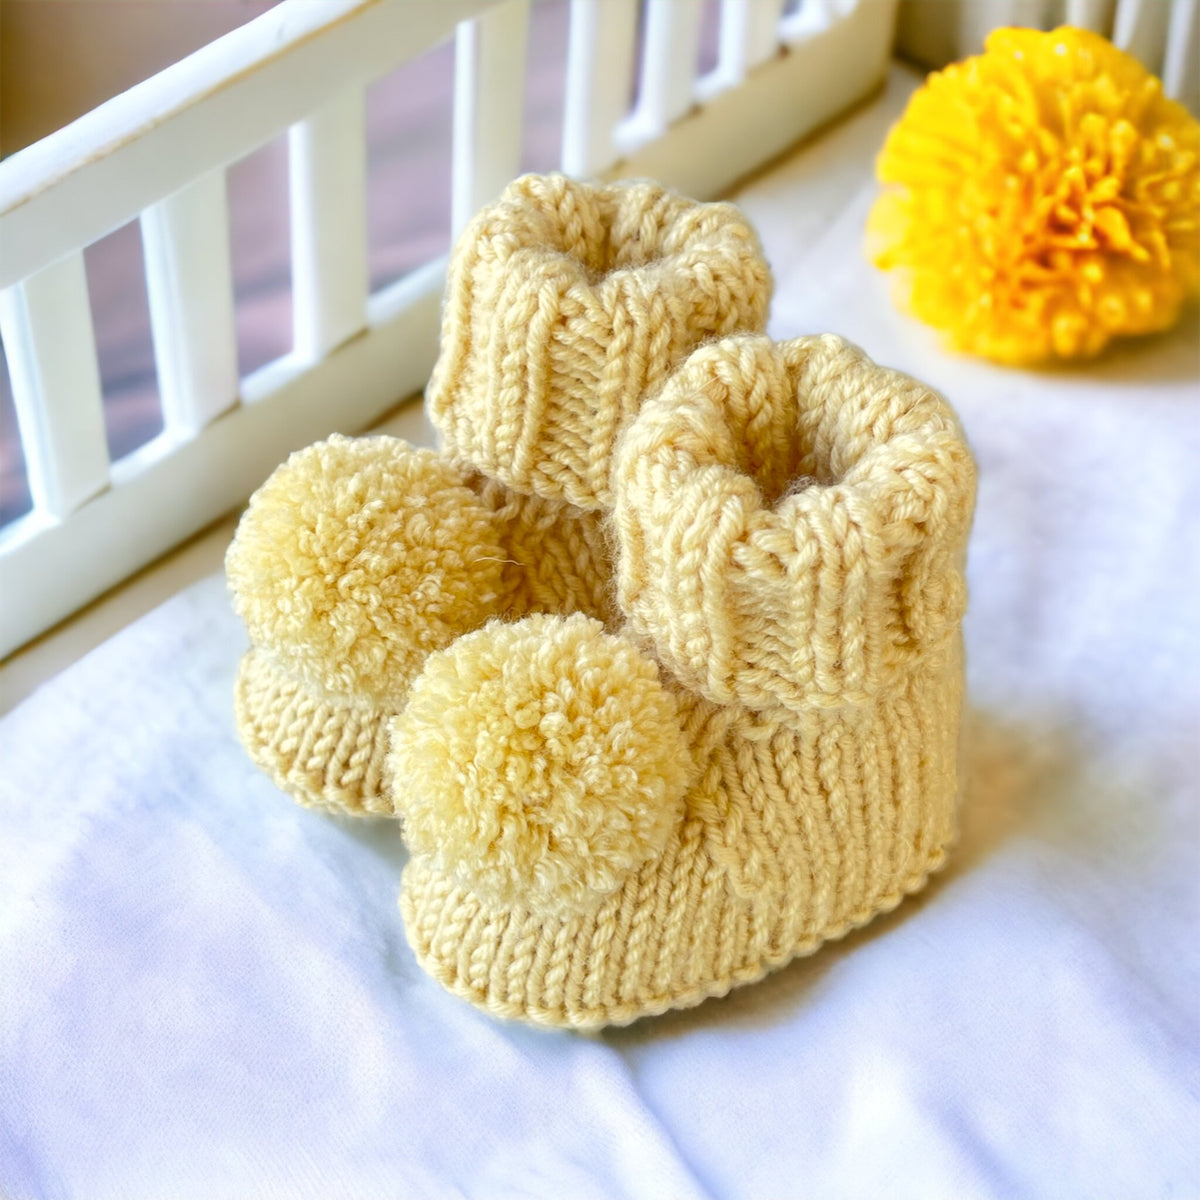 Hand Knitted Baby Booties - Stay on booties - Pom Pom Booties